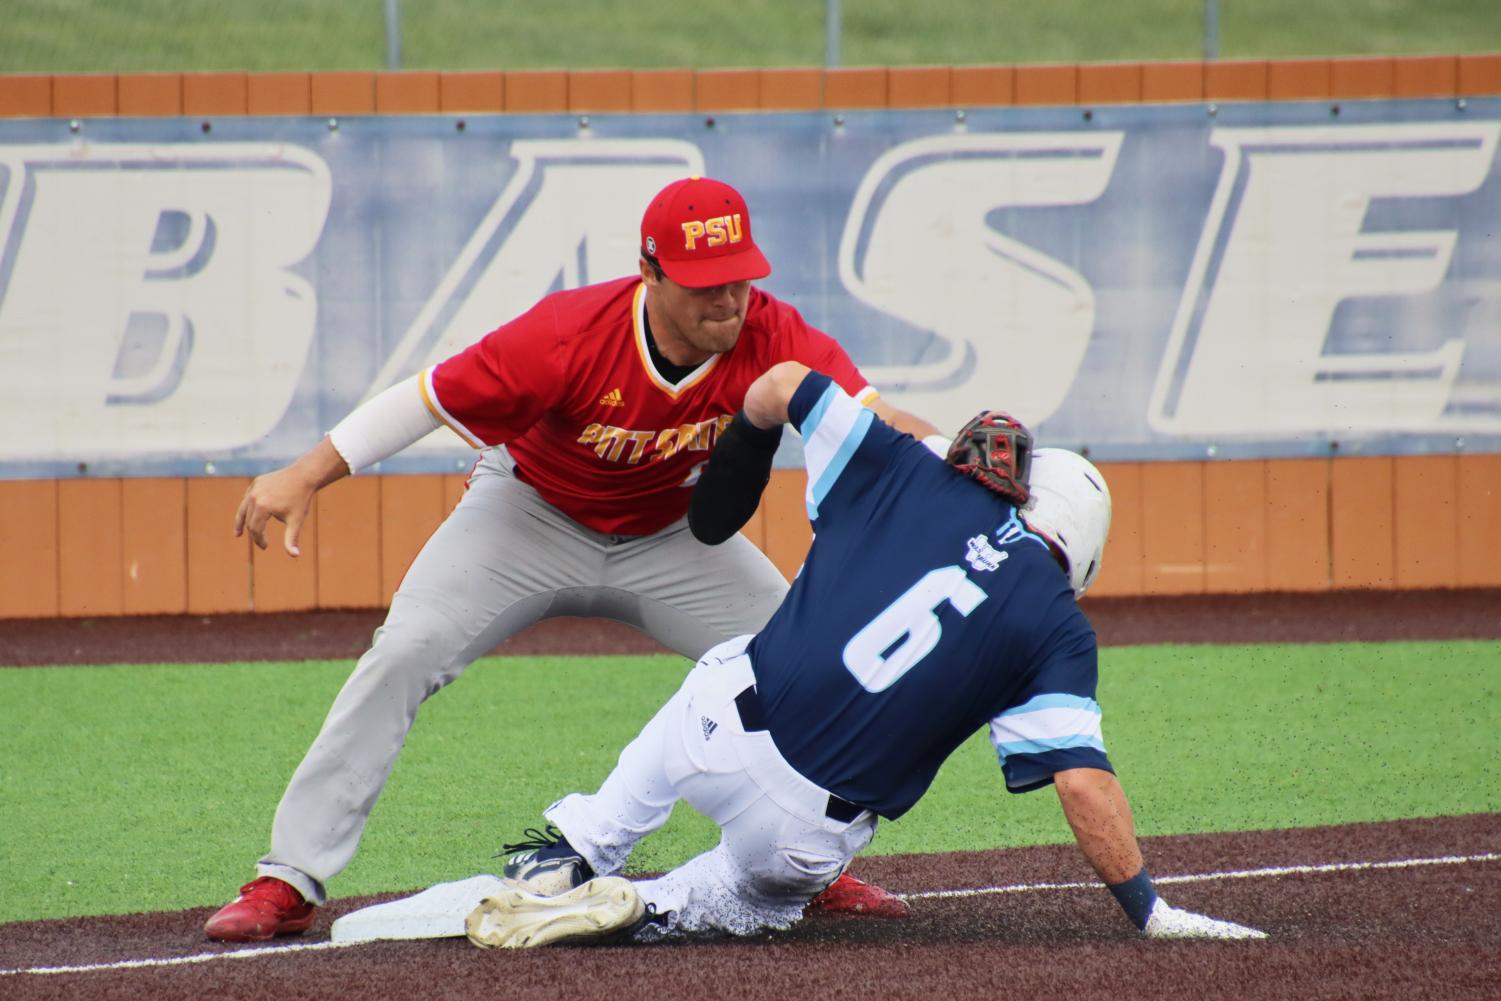 Baseball bruised after 14-3 loss to Pitt State – The Washburn Review